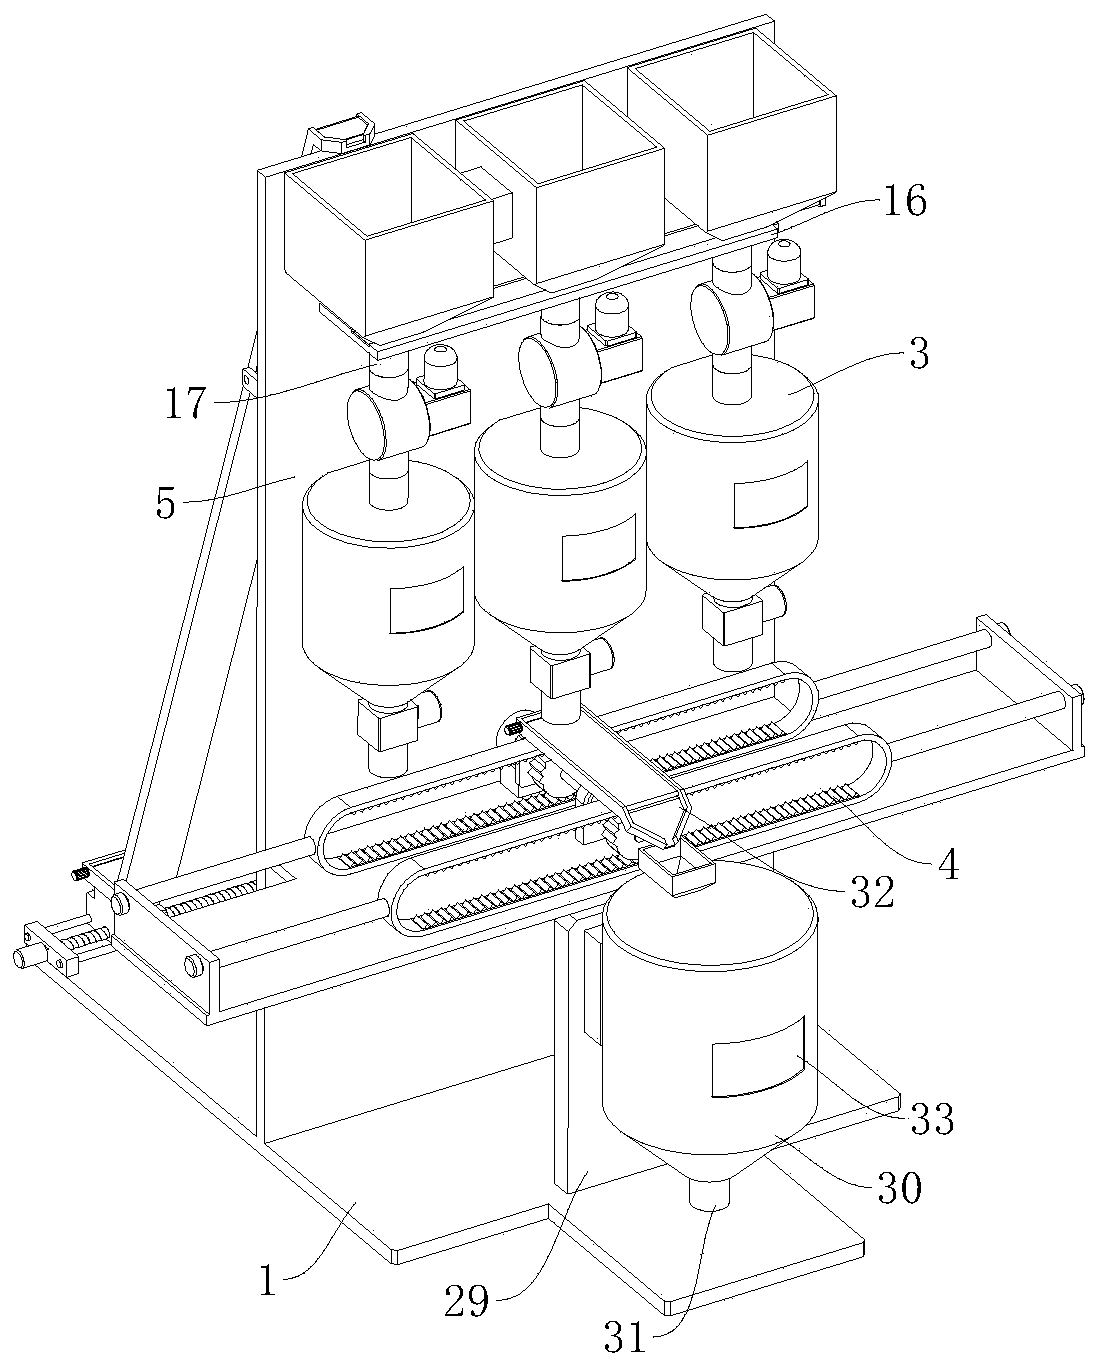 Automatic proportioning and conveying equipment for production of dry-mixed mortar